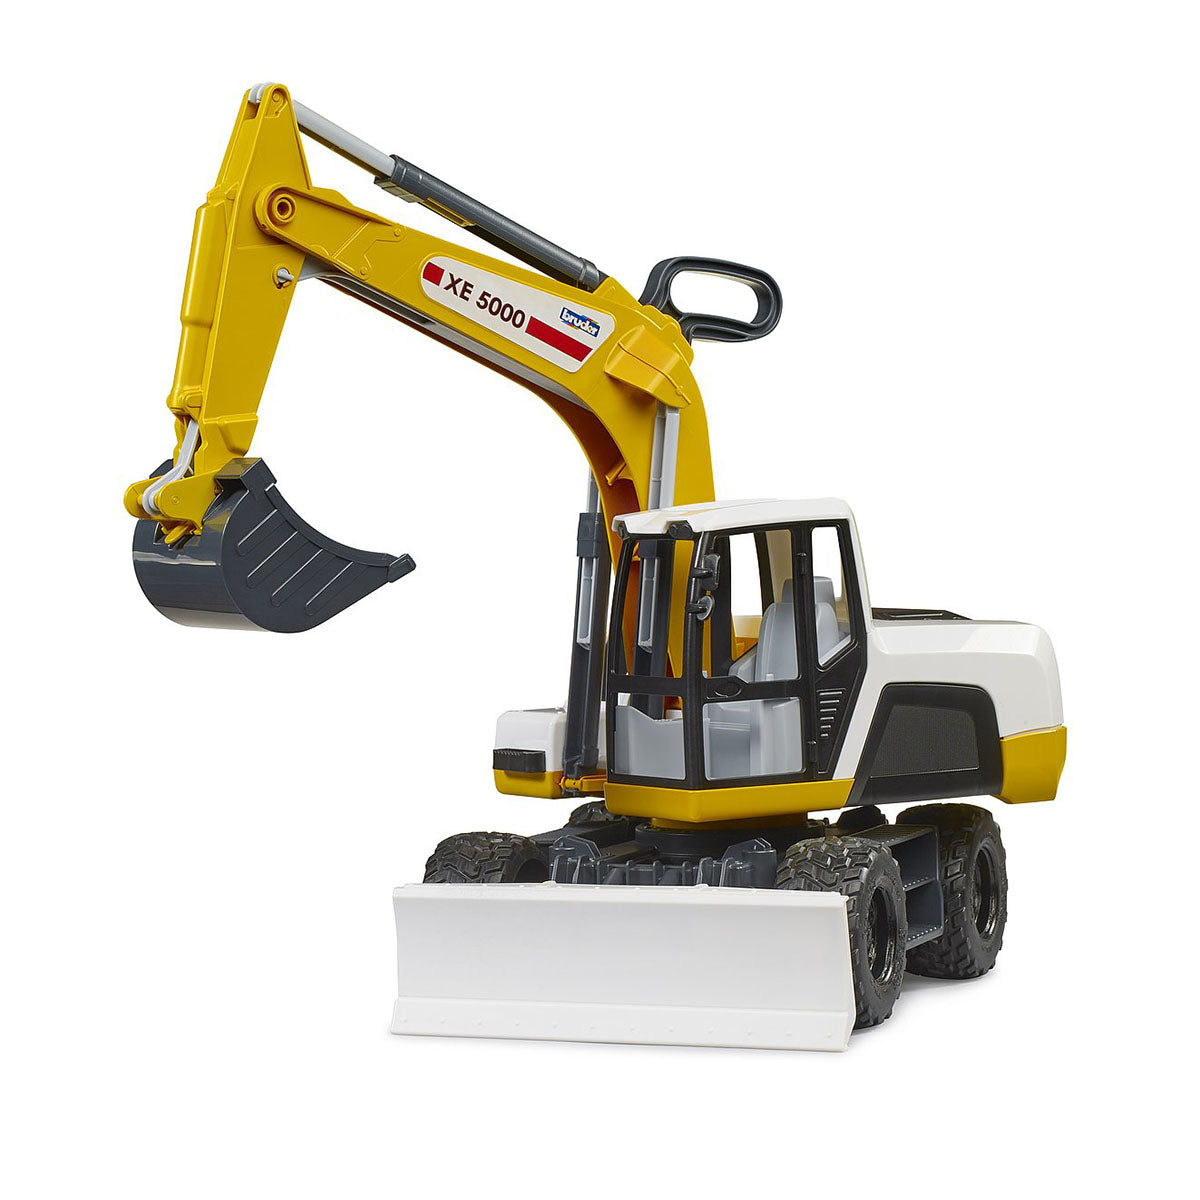 Roadmax excavator construction toy with arm and bucket raised.